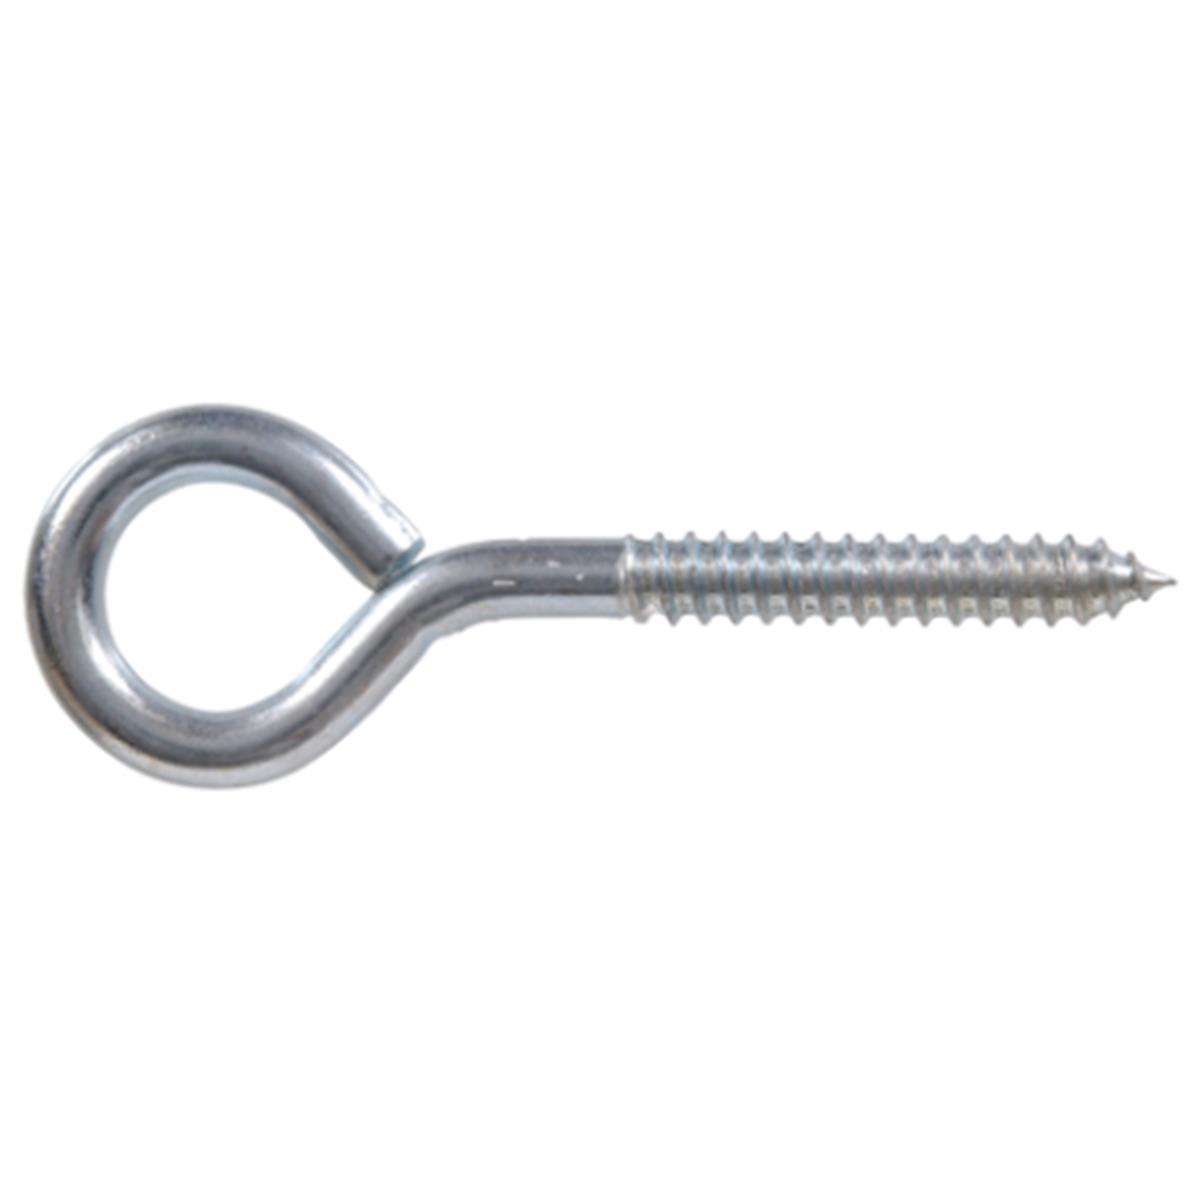 0.5 X 8 In. Zinc Plated Eye Lag Bolt - Pack Of 5